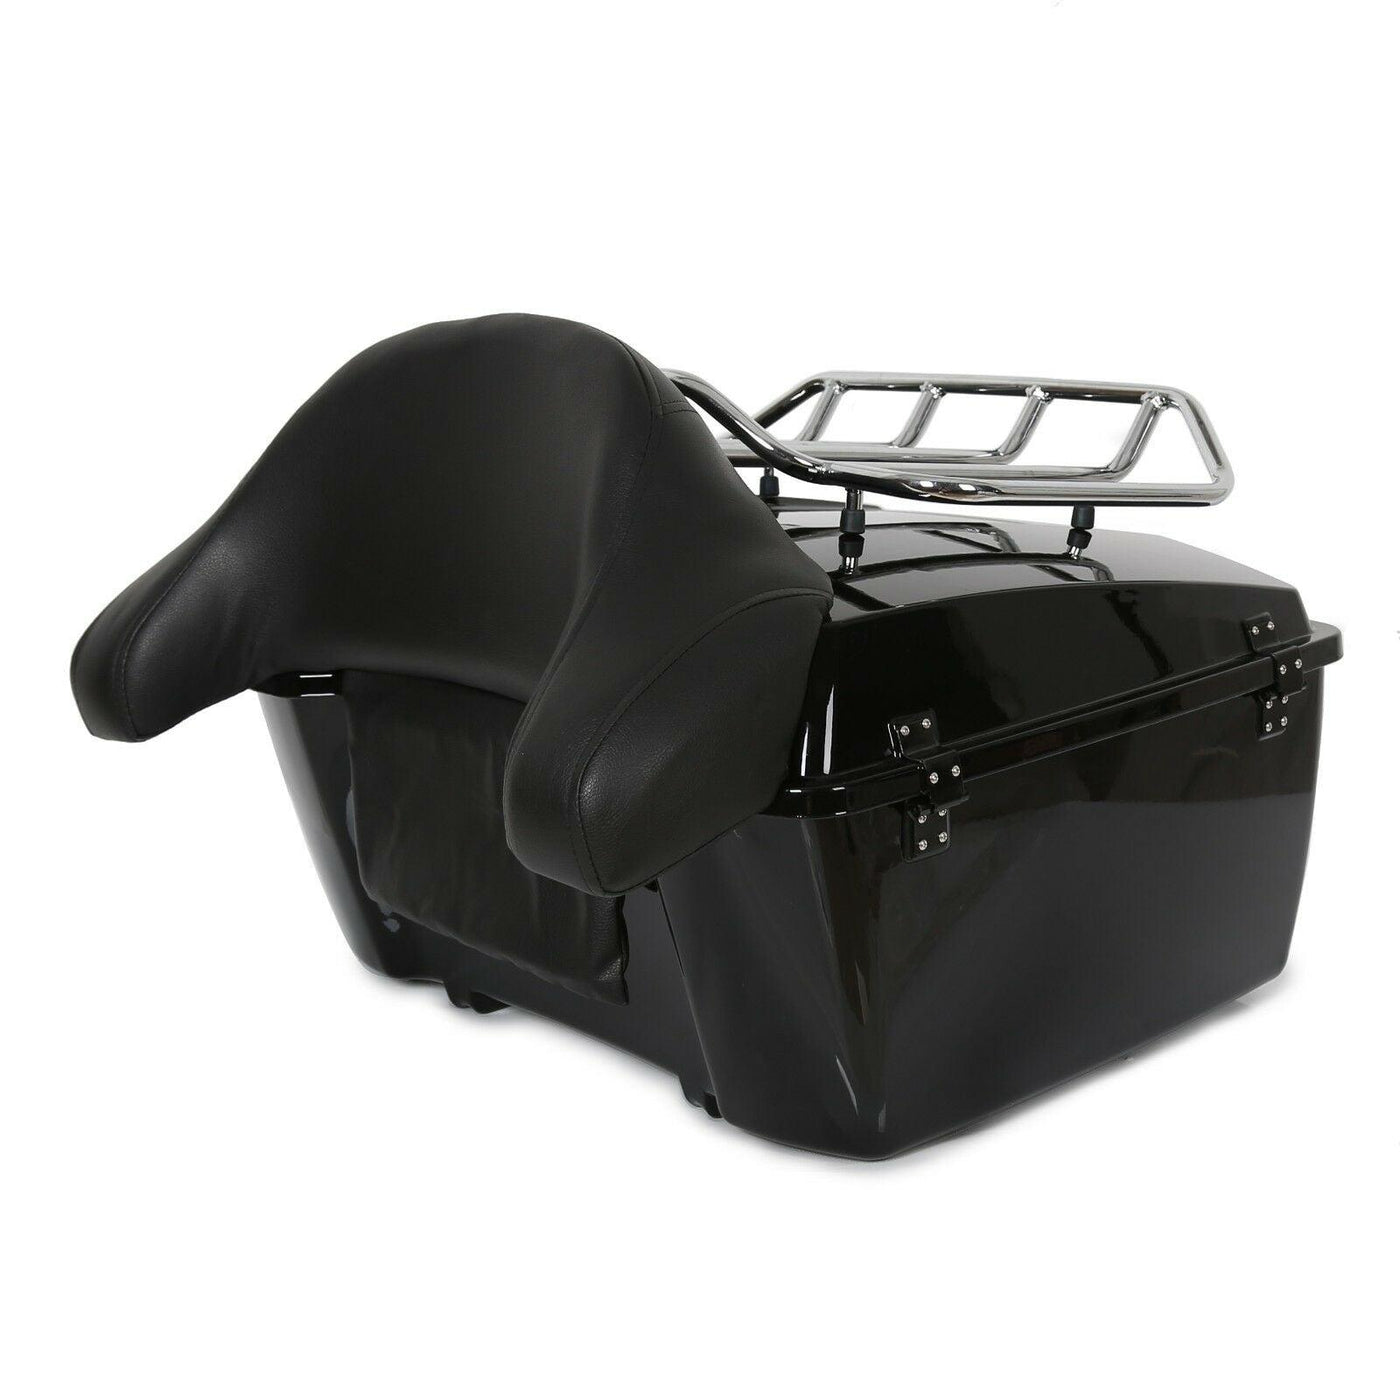 Black Harley Tour pack trunk For Touring Road King Electra glide w/luggage rack - Moto Life Products